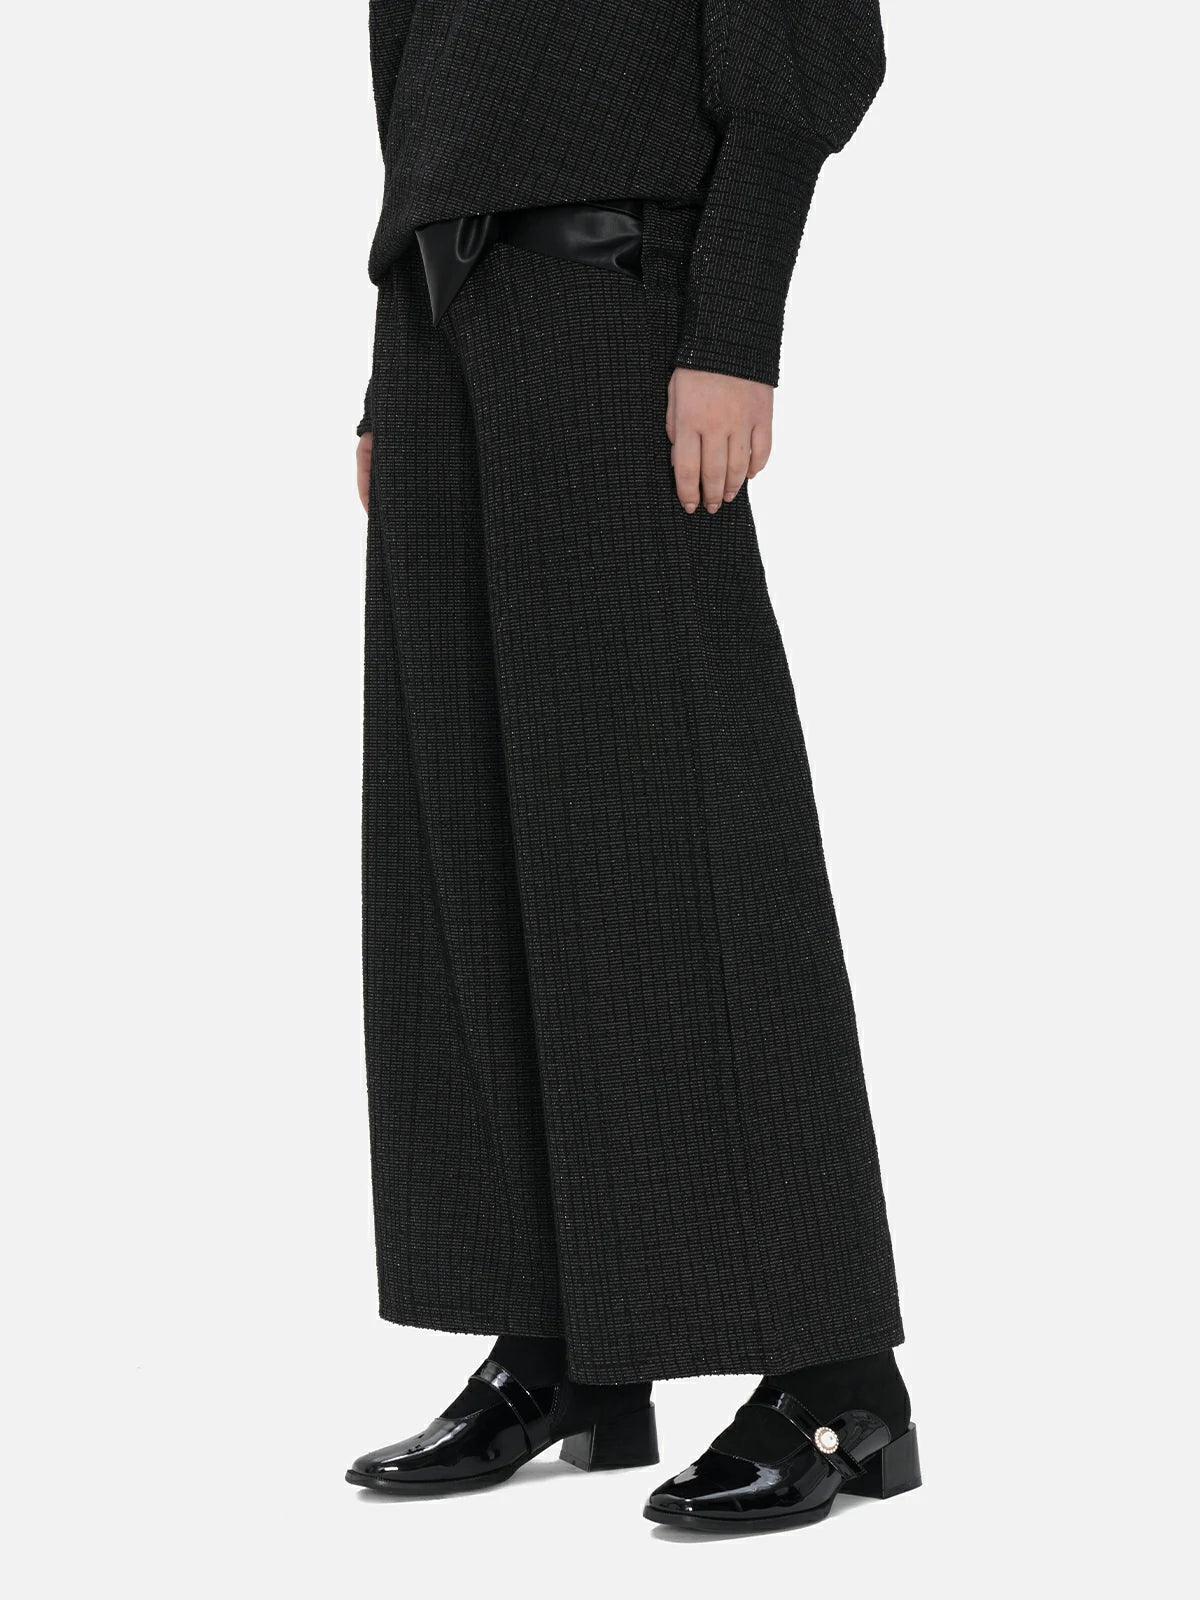 Casual yet stylish deep black trousers with buckle detail